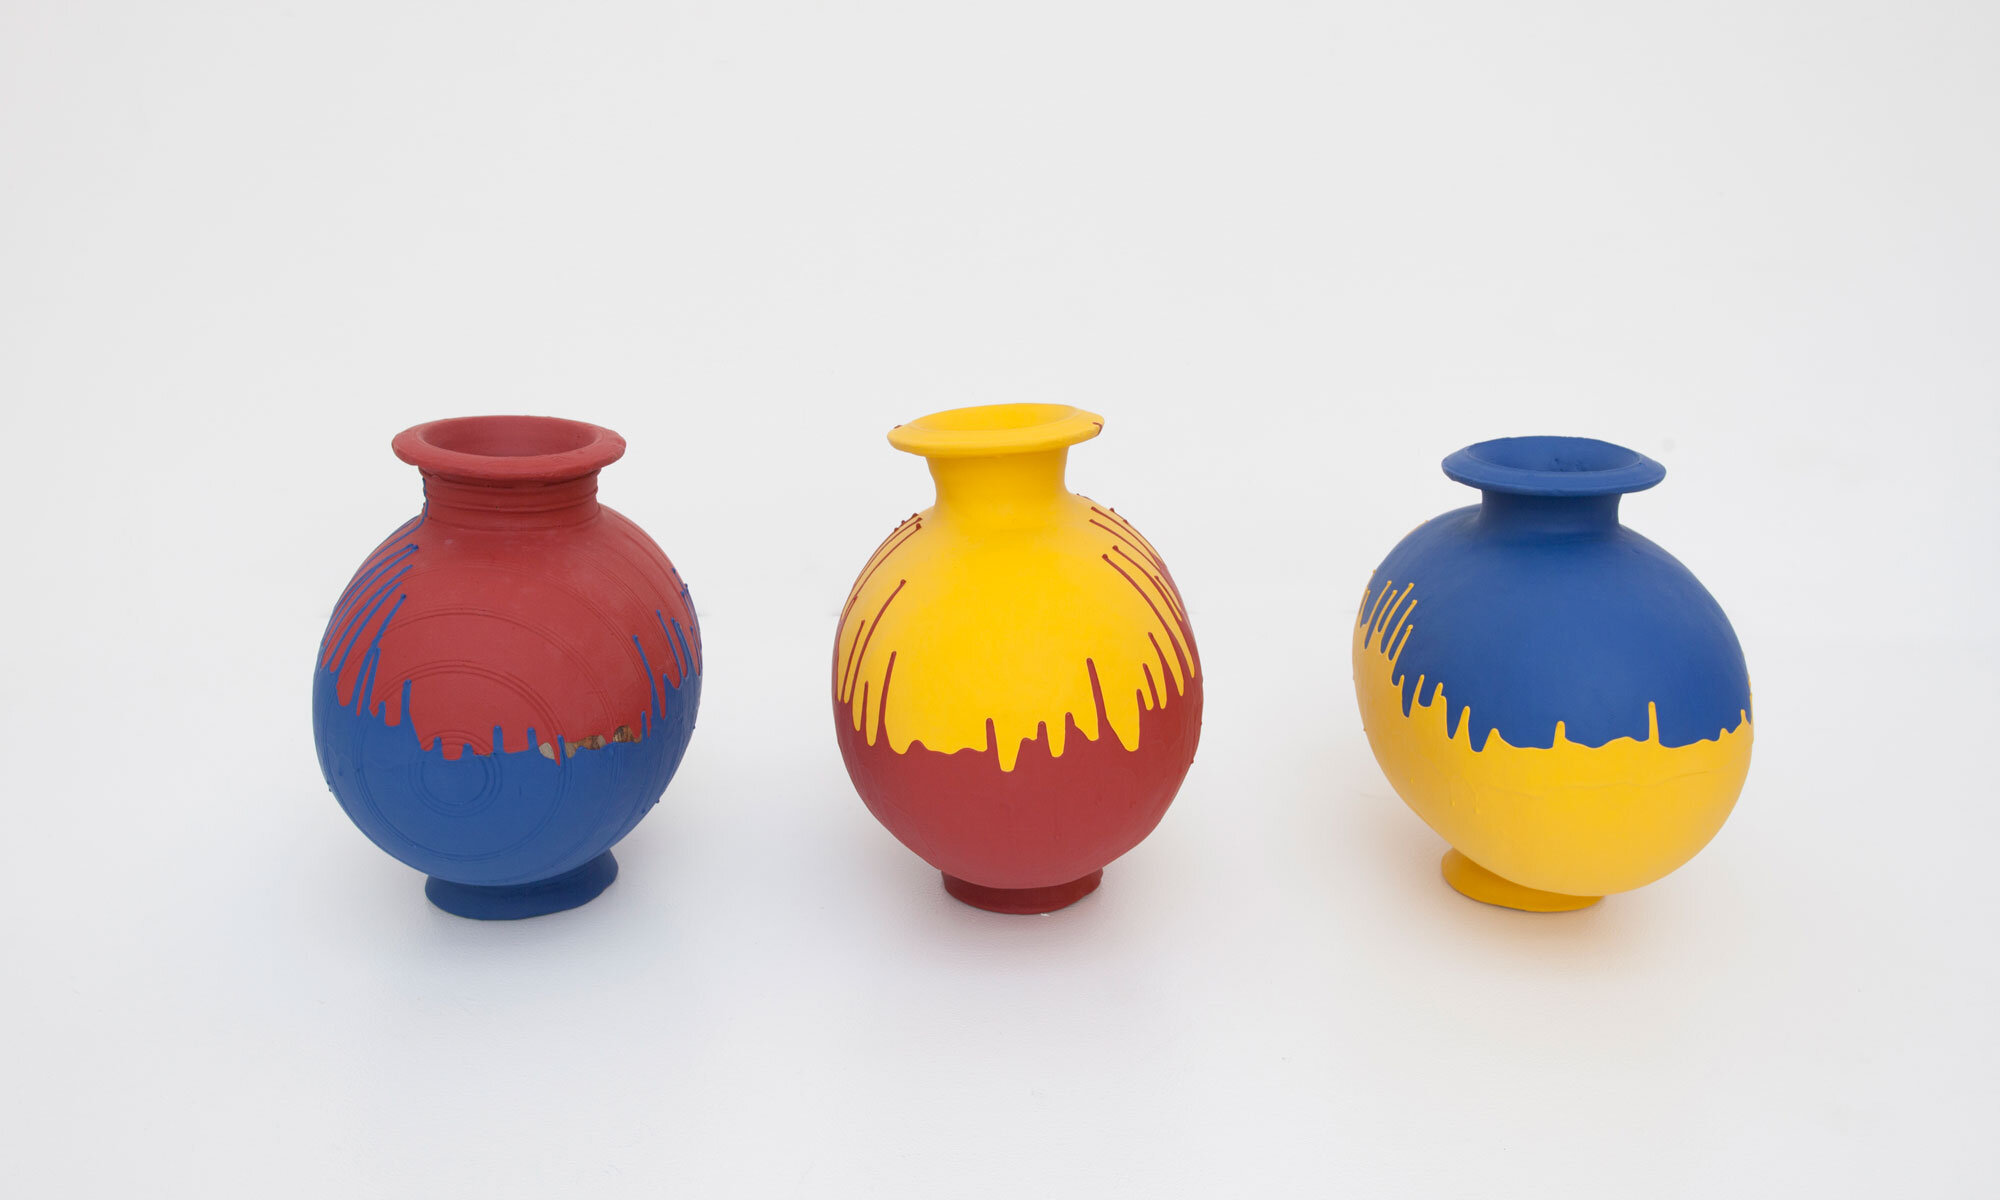 ai-weiwei-colored-vases-3.jpg